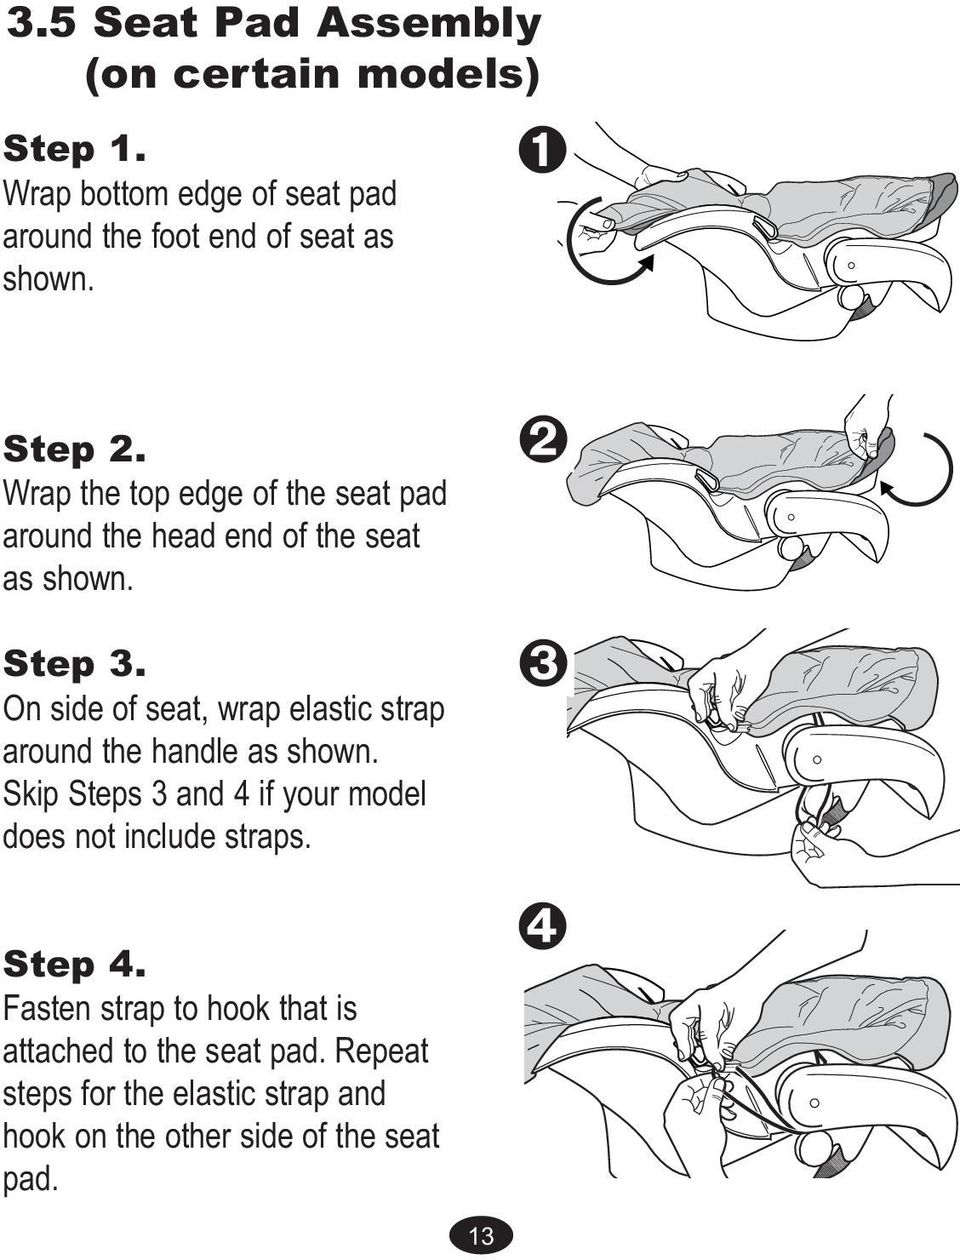 On side of seat, wrap elastic strap around the handle as shown. Skip Steps 3 and 4 if your model does not include straps.